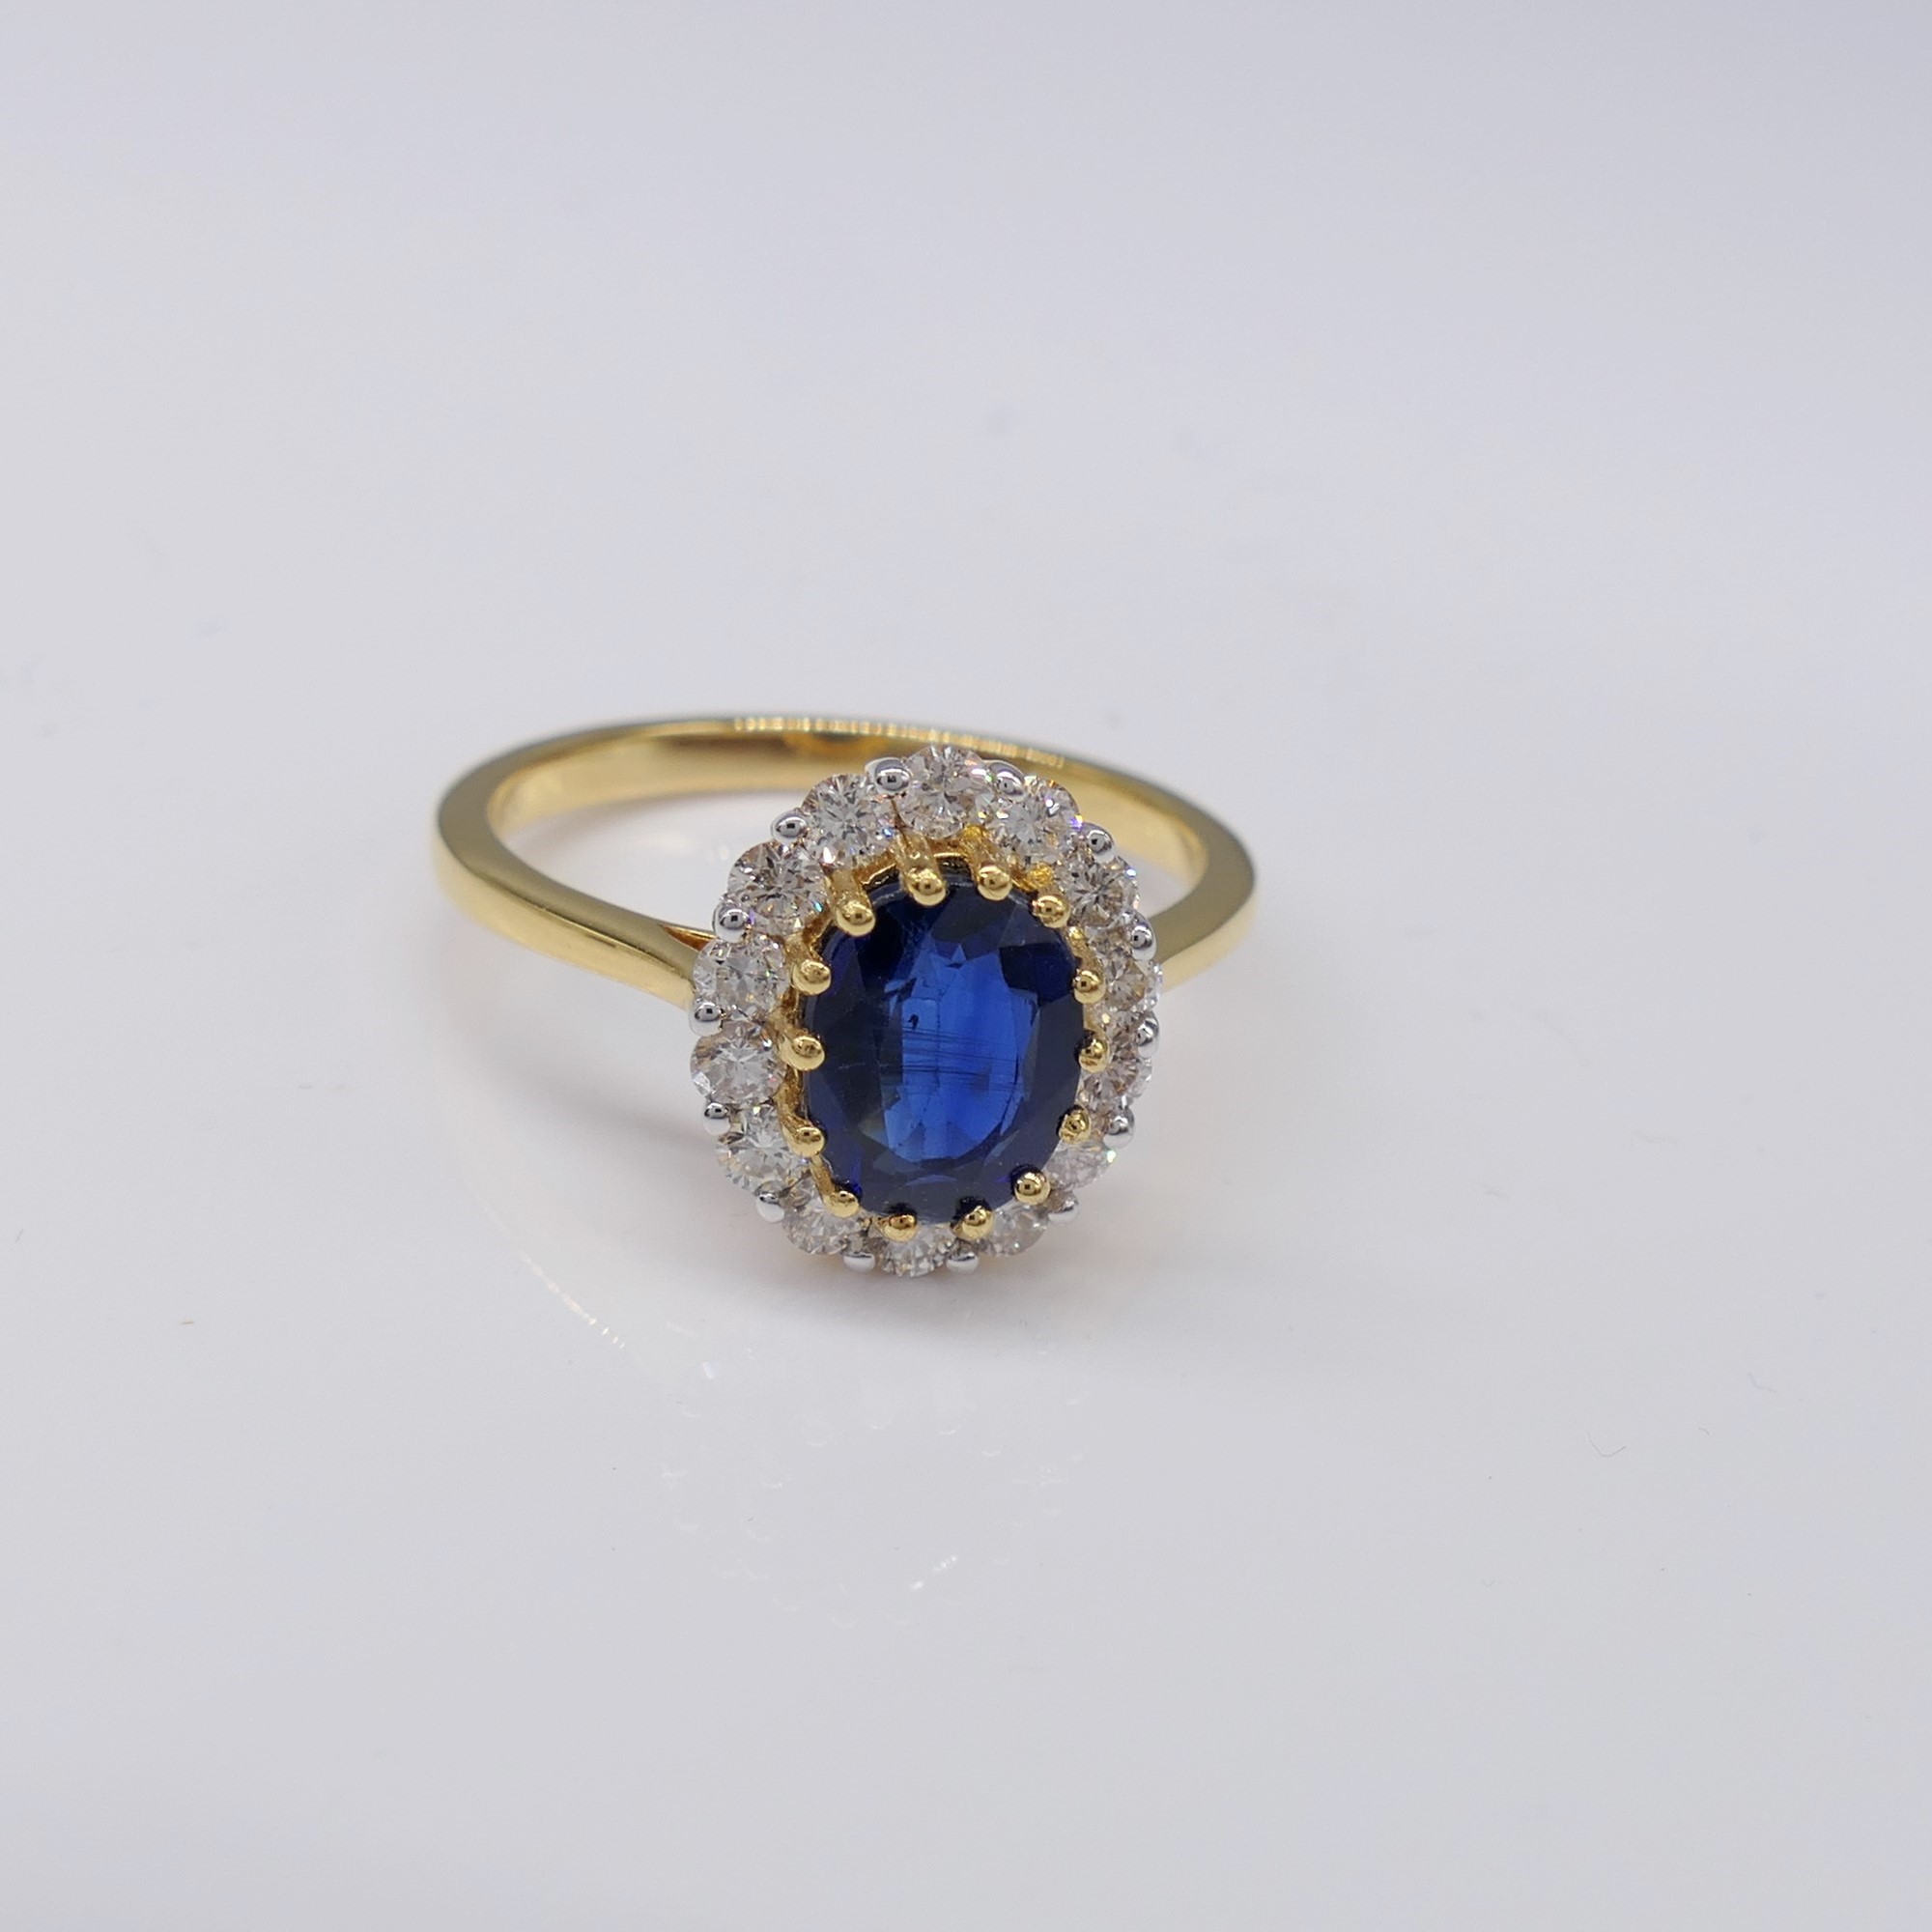 18ct yellow gold kyanite and diamond cluster ring with certificate - Image 6 of 7